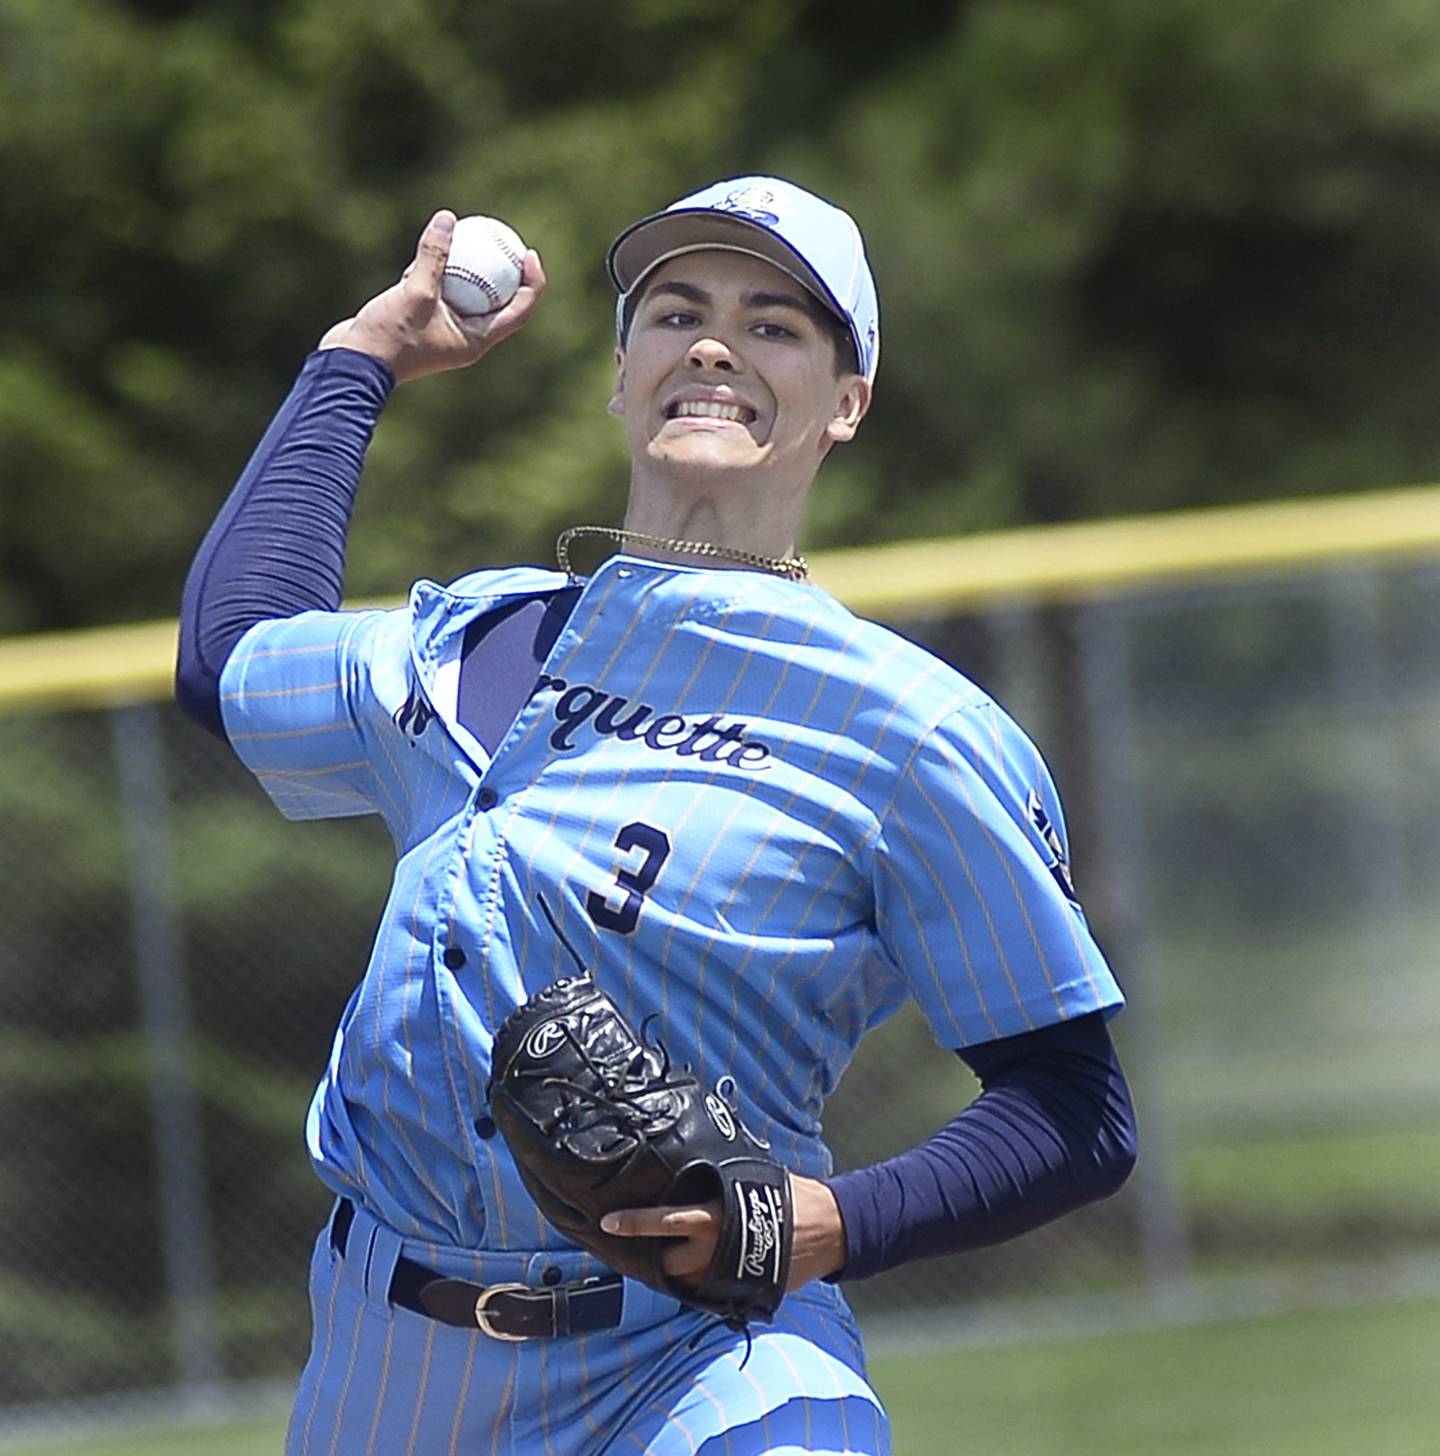 Marquette starting pitcher Taylor Waldron let's go with a pitch against St Bede on Saturday, May 20, 2023 at Masinelli Field in Ottawa.